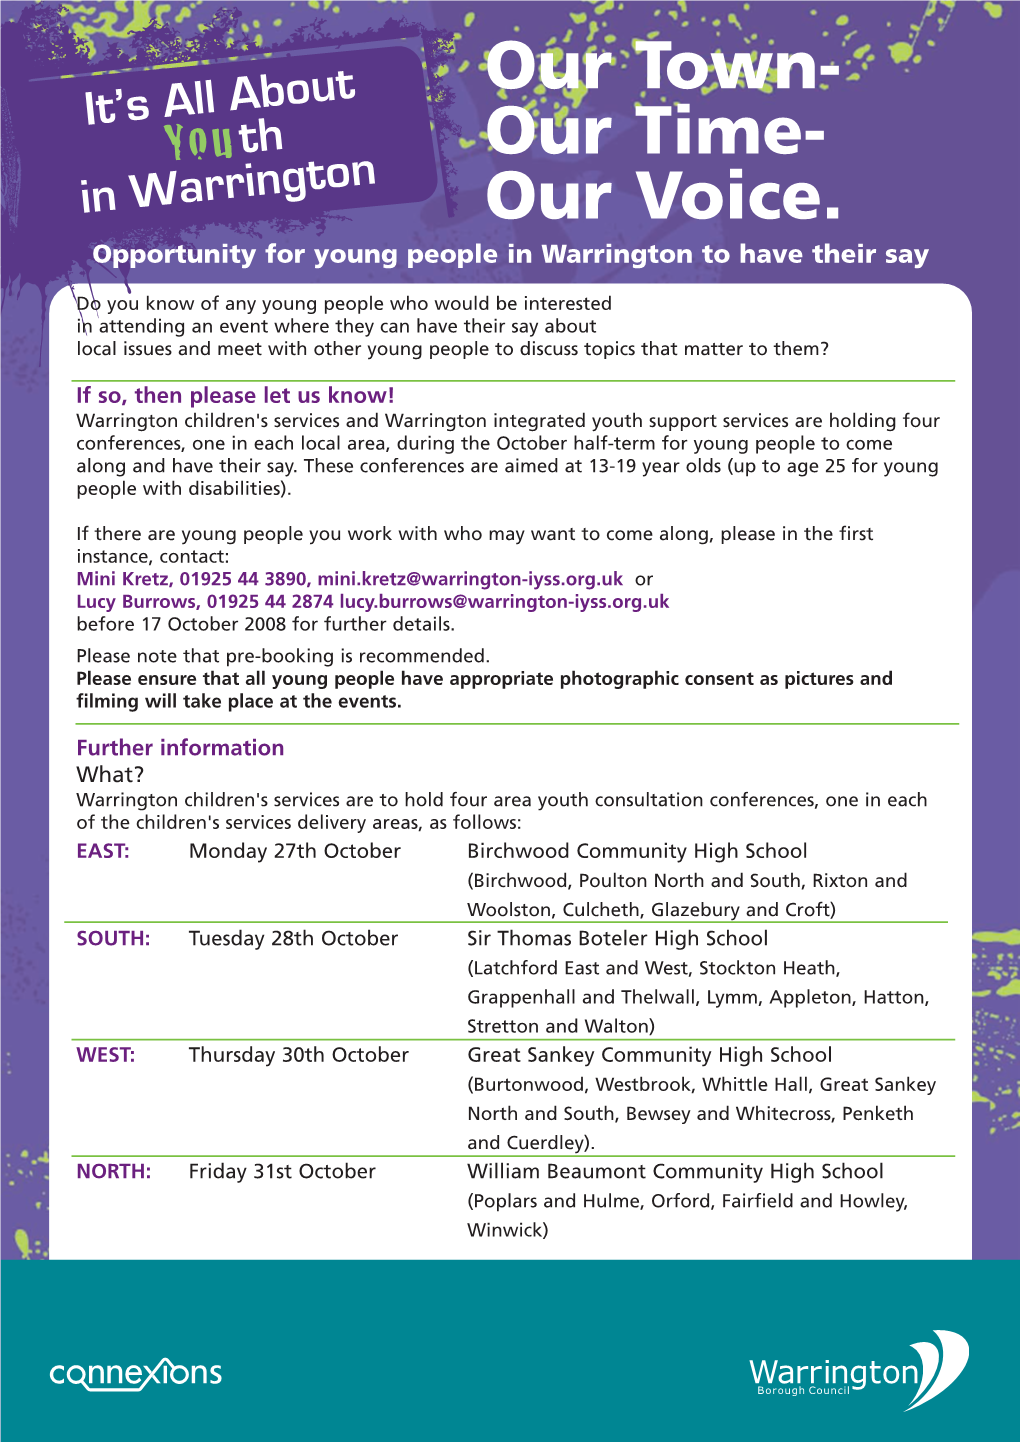 Our Voice. Opportunity for Young People in Warrington to Have Their Say